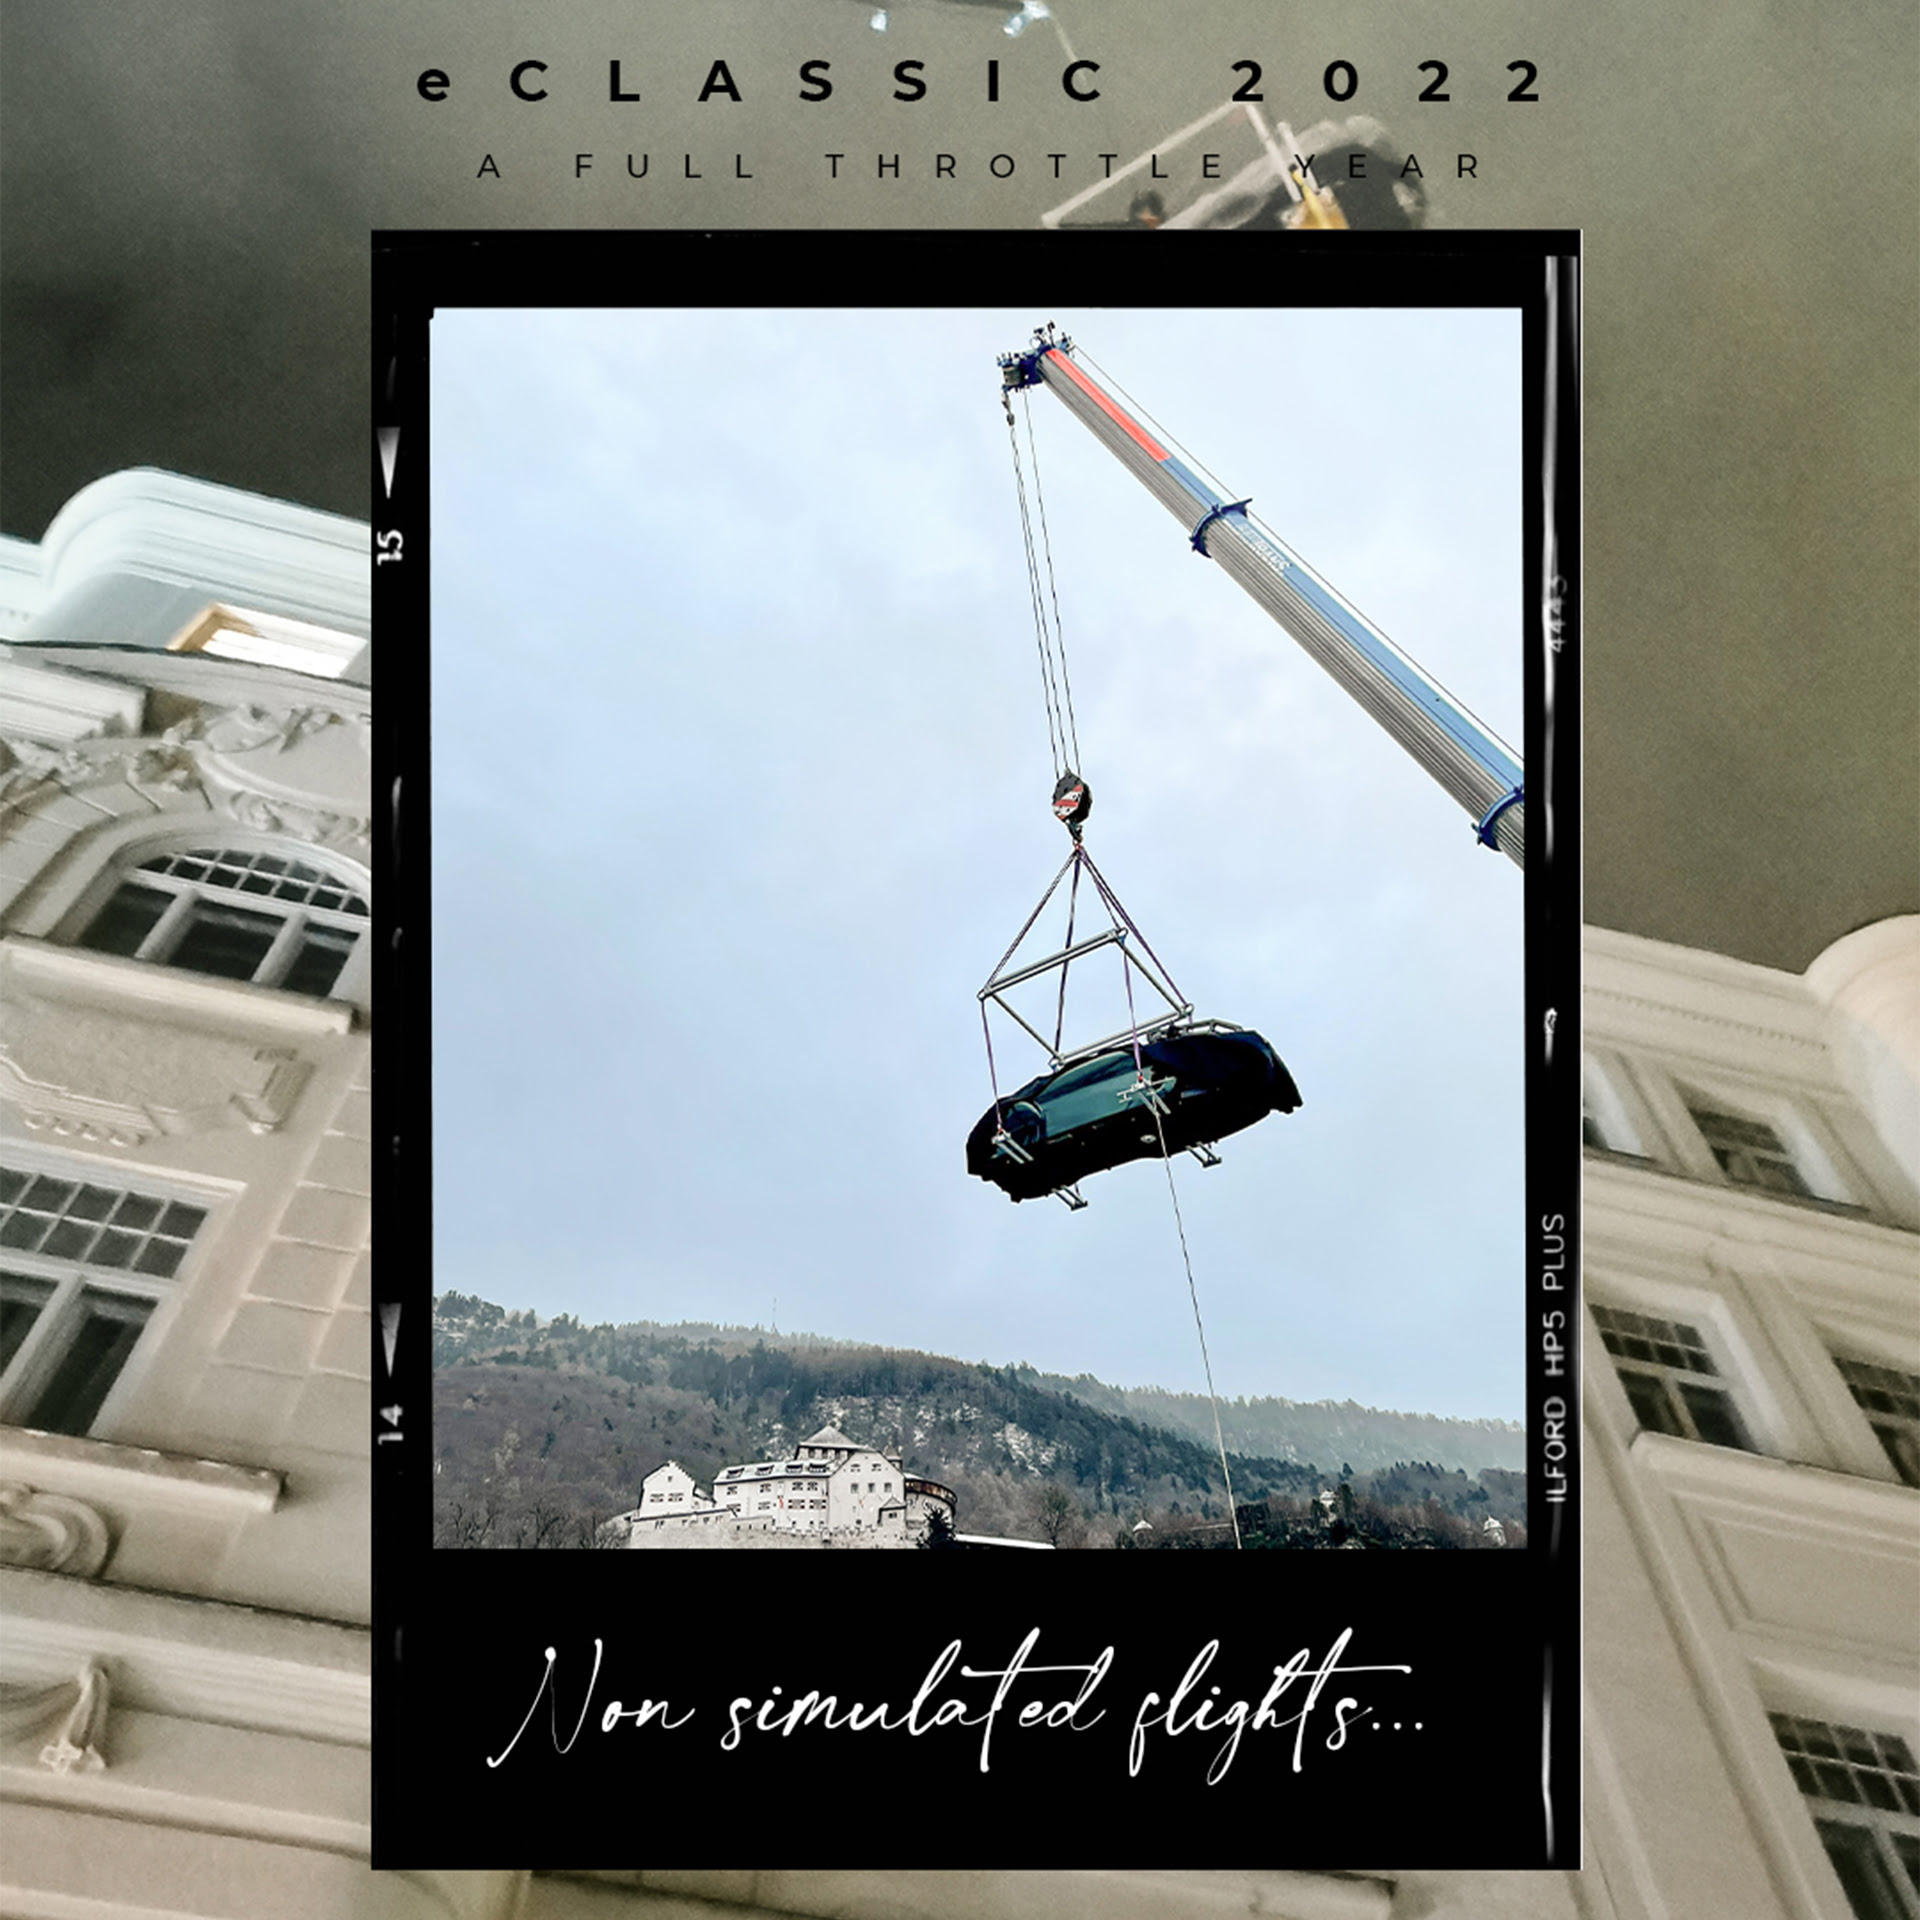 eClassic 2022: a full throttle year Non simulated flights… image